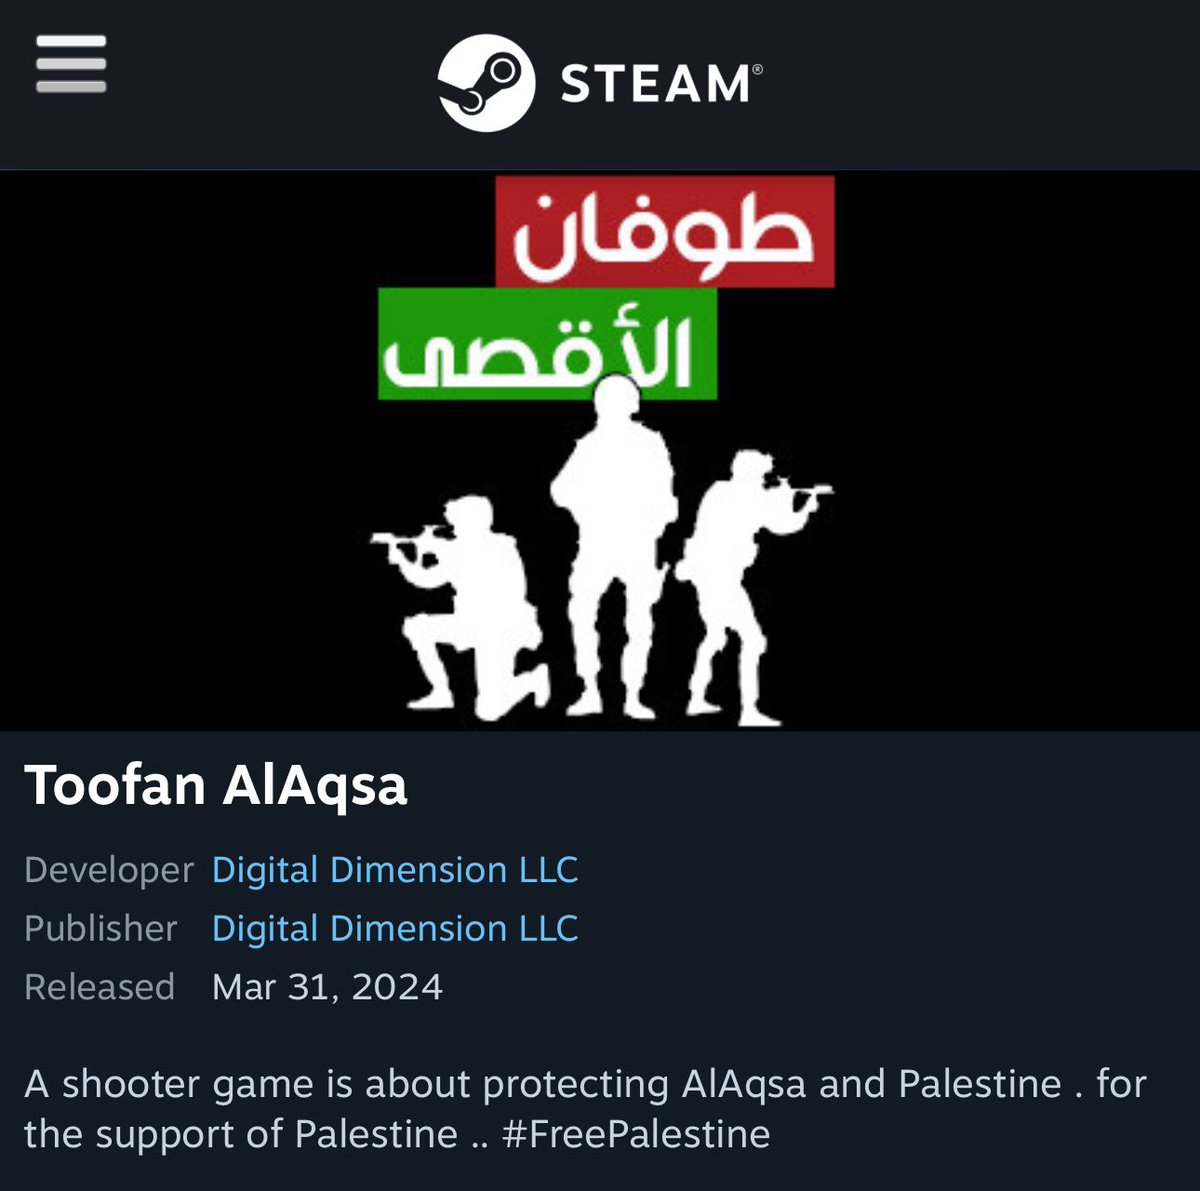 Because there’s not enough violence propagated against Jews worldwide, @Steam thought it would be a great idea to platform a game aimed at shooting Jews.